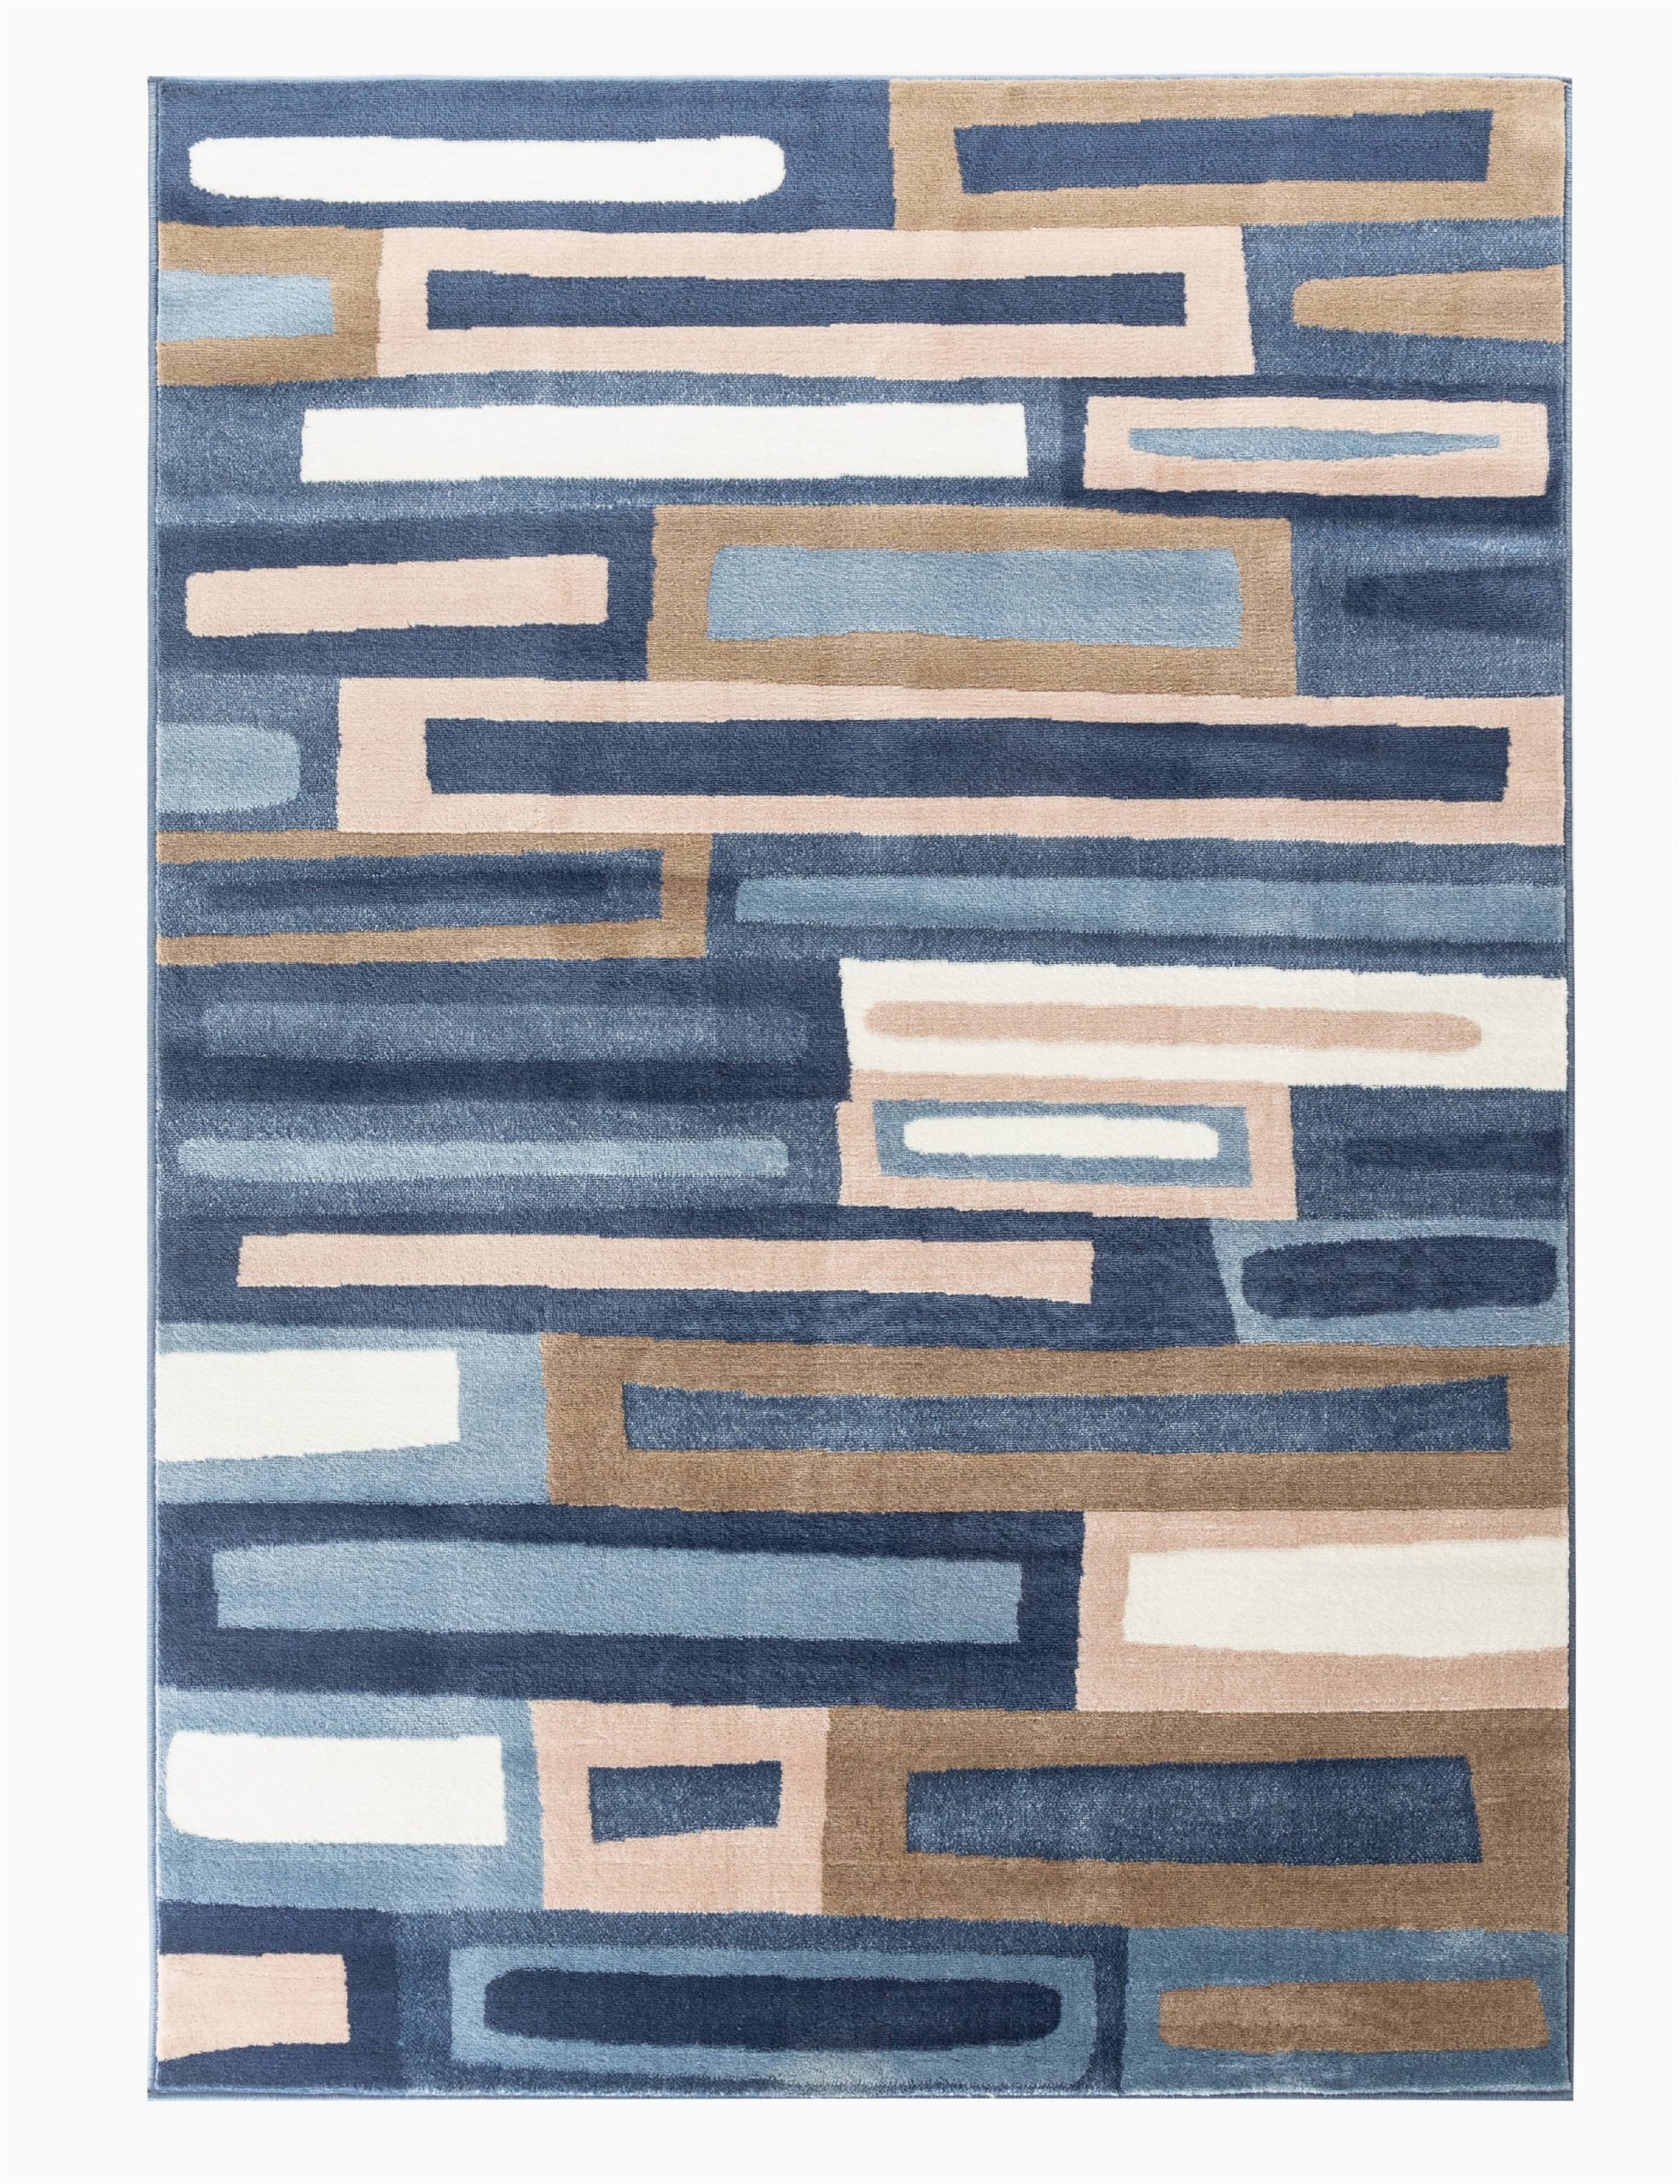 Area Rugs Blue and Tan Romance Collection Rugs Blue Brown Cream White Geometric Abstract Design Premium soft area Rug 3 7" X 5 Rug Size Walmart